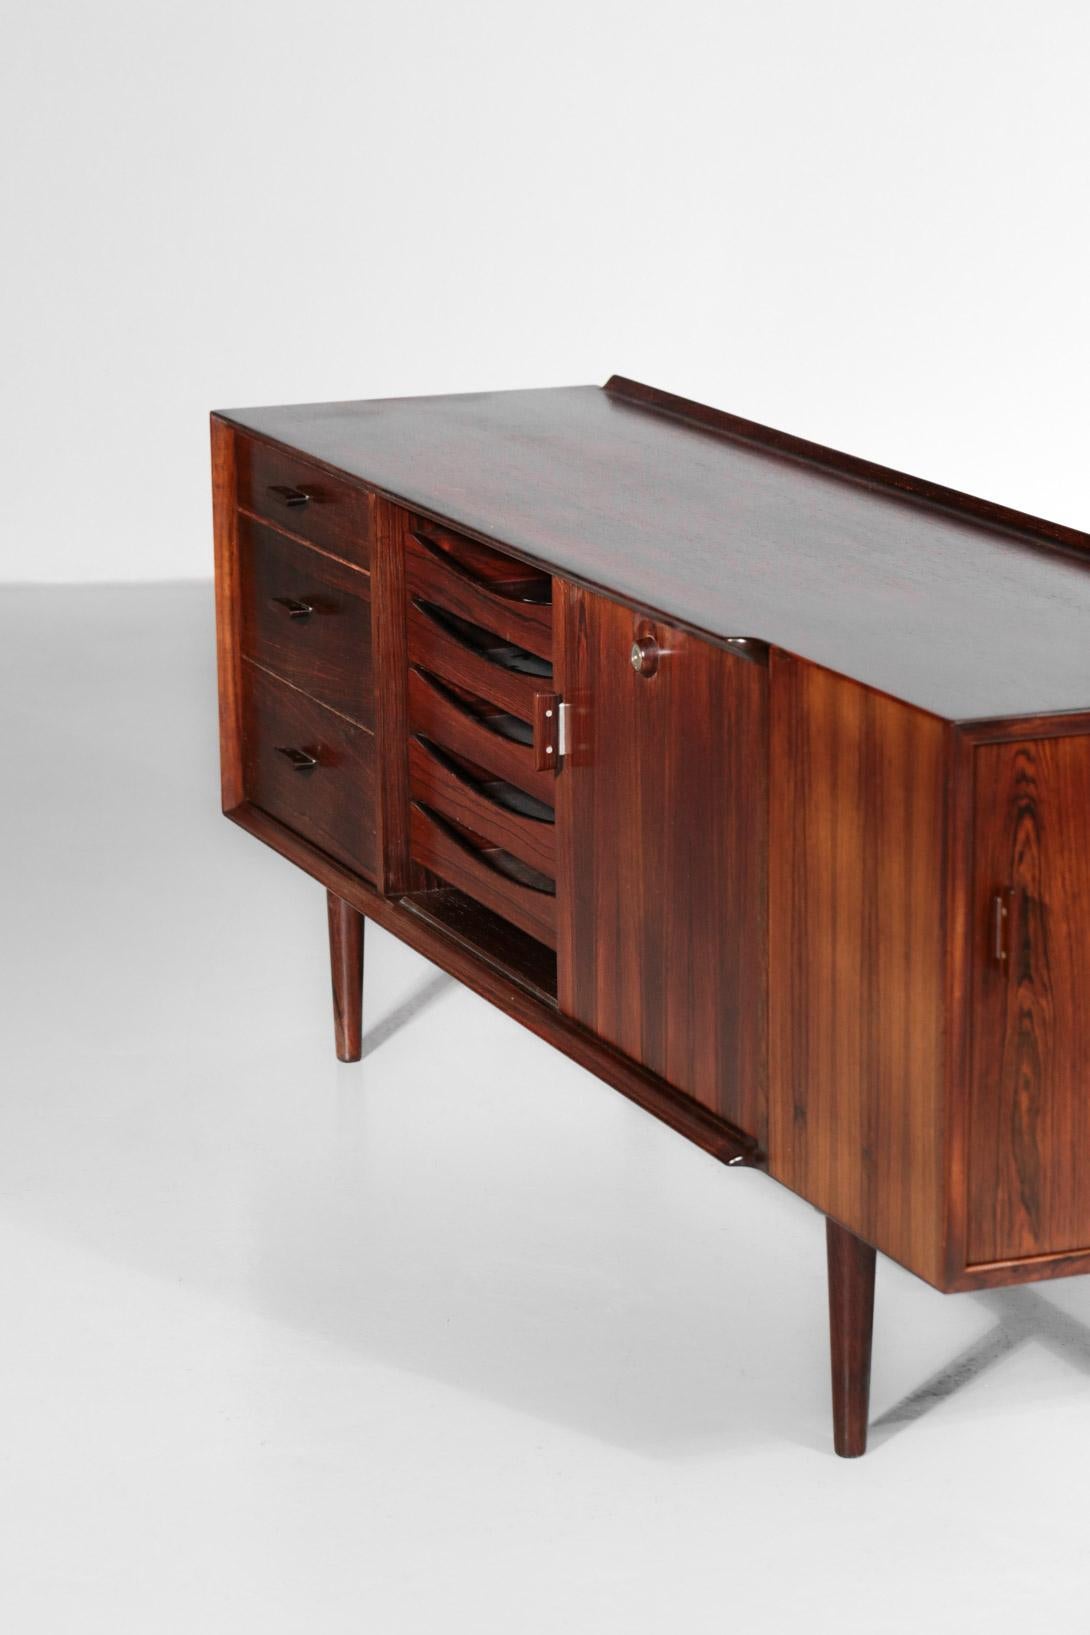 Mid-20th Century Small Sideboard by Arne Vodder for Sibast, Danish Design For Sale